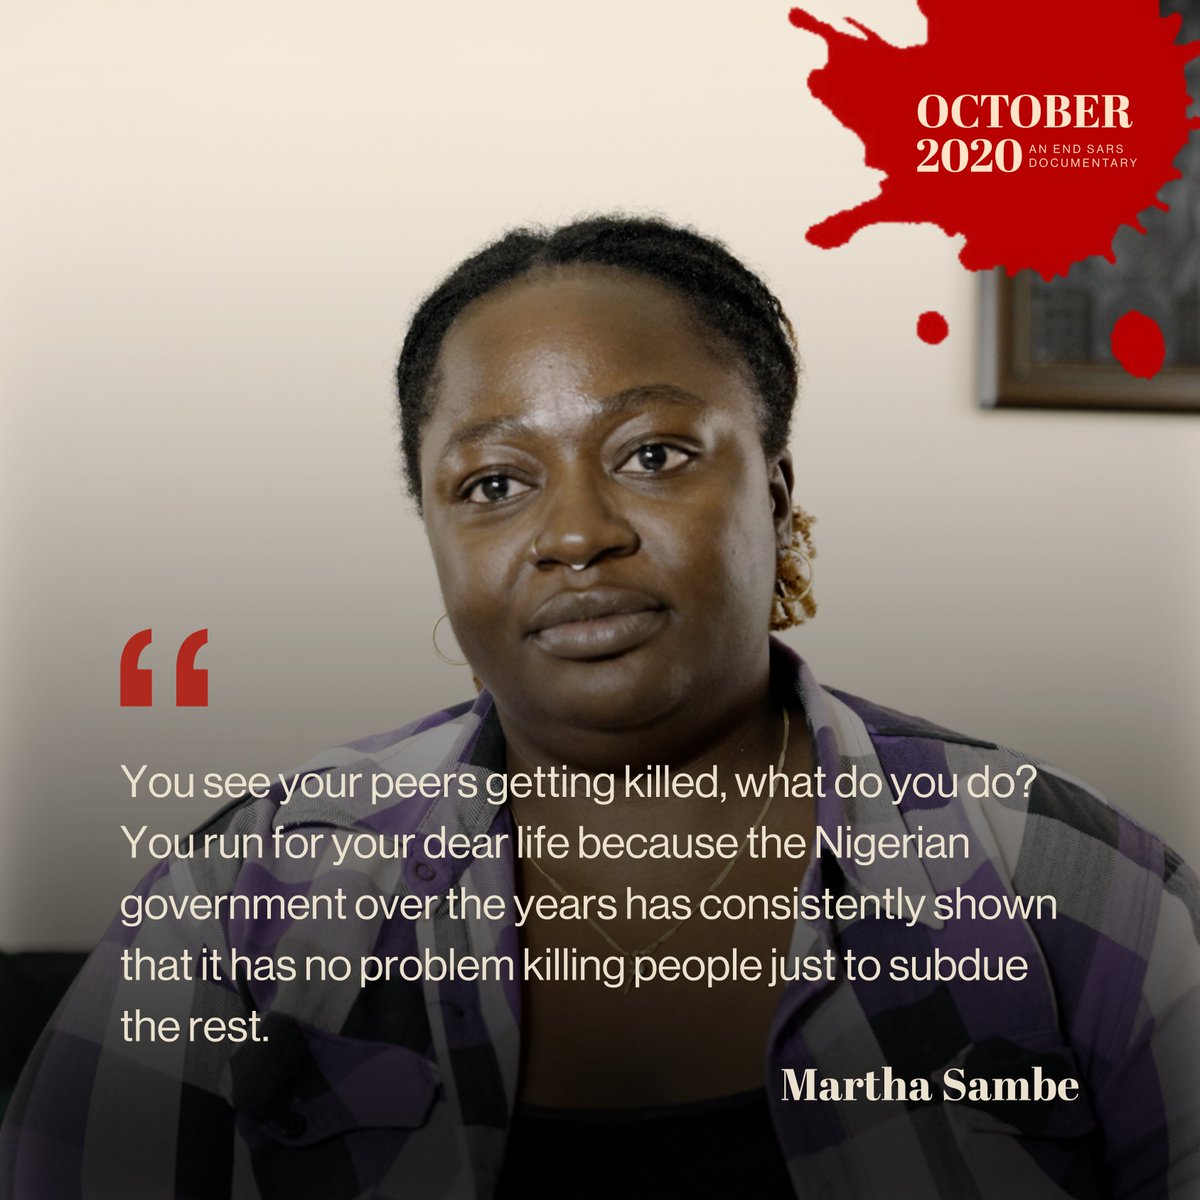 During the #ENDSARS protests, Martha was beaten by police in Abuja, suffering injuries, including a cracked skull. Our documentary, “October 2020”, highlights stories like hers, exploring the protests' lasting impact on Nigerians. Watch now: youtube.com/watch?v=d9tKlP…